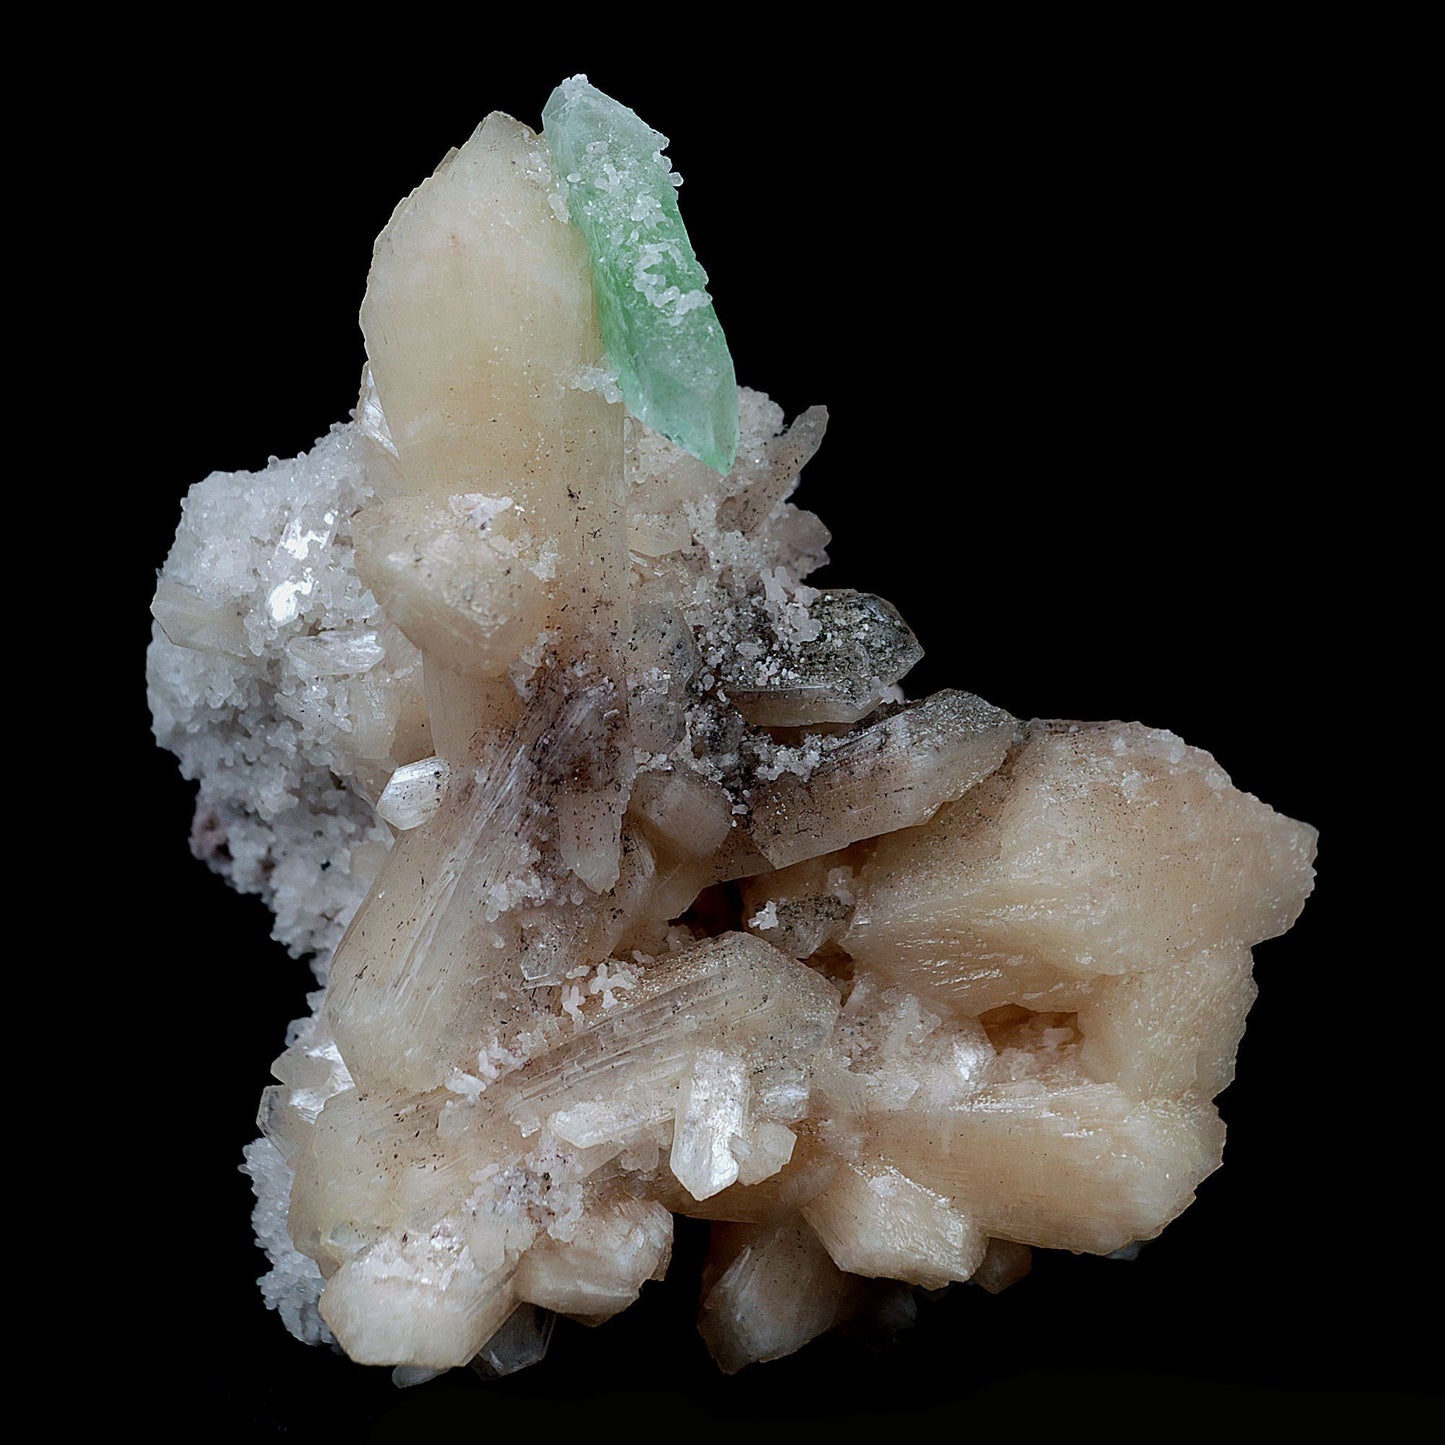 Green Apophyllite with Stilbite on Chalcedony Natural Mineral Specimen…  https://www.superbminerals.us/products/green-apophyllite-with-stilbite-on-chalcedony-natural-mineral-specimen-b-4116  Features:The specimen consists of striking, strongly lustrous, transparent and gem, rich green Apophyllite crystals growing in a beautiful spray. The quality of the Apophyllite is tremendous - transparent, limpid, perfect sharp pyramidal terminations and water clear. Small Stilbite crystals are seen too. In superb